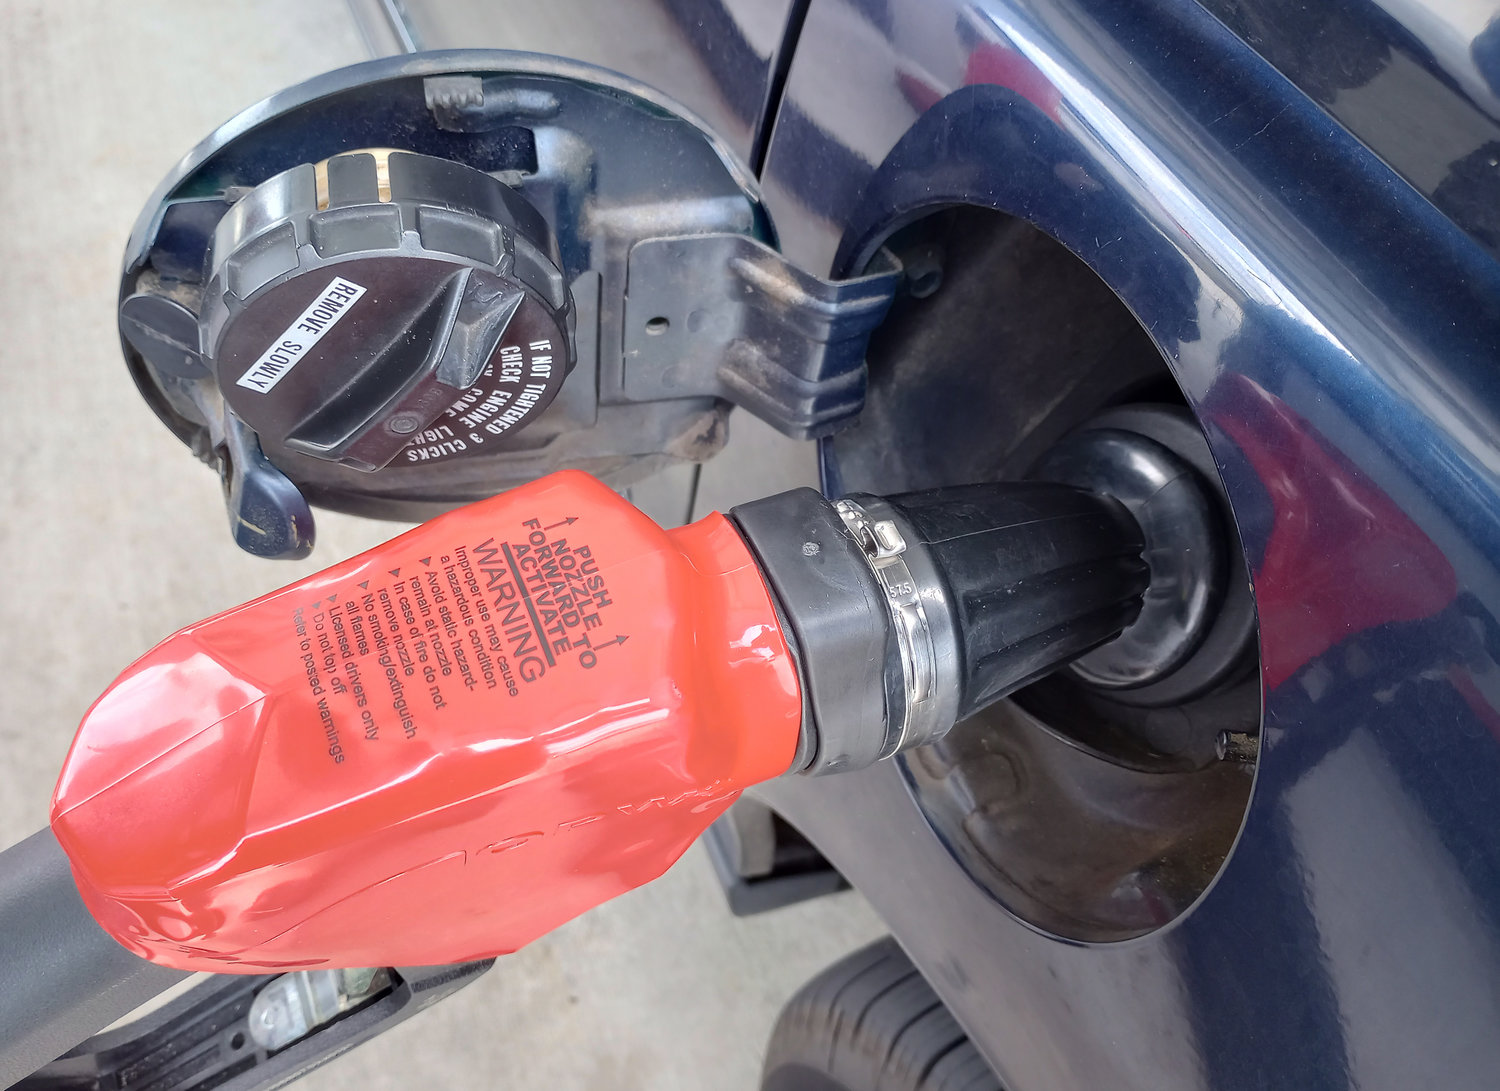 A motorist fills his tank at a Costco gas station in Dallas, Ga., Aug. 6, 2022. (Christian Index/Henry Durand)